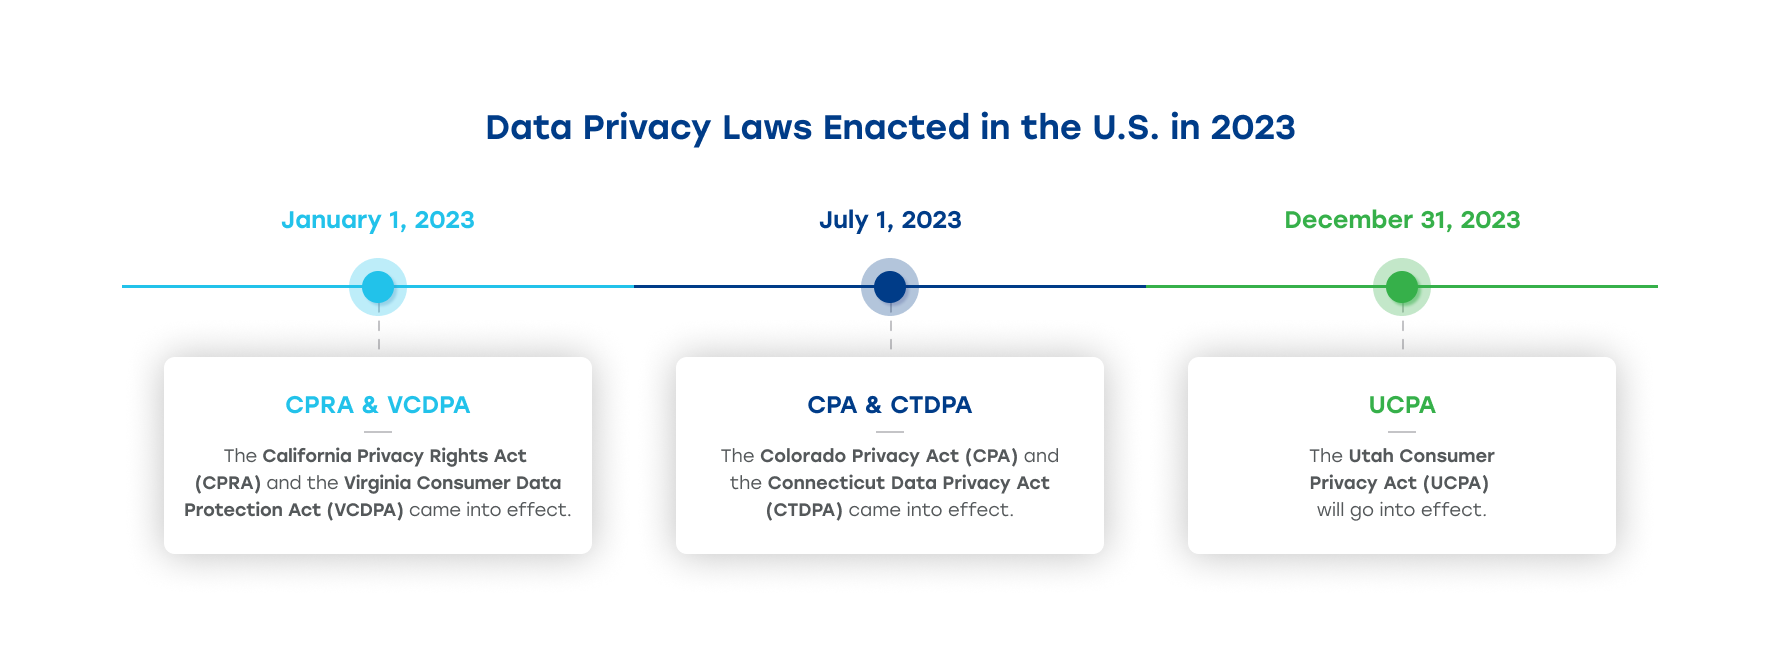 a timeline showing when when California, Virginia, Colorado, Connecticut, and Utah have or will implement data privacy laws